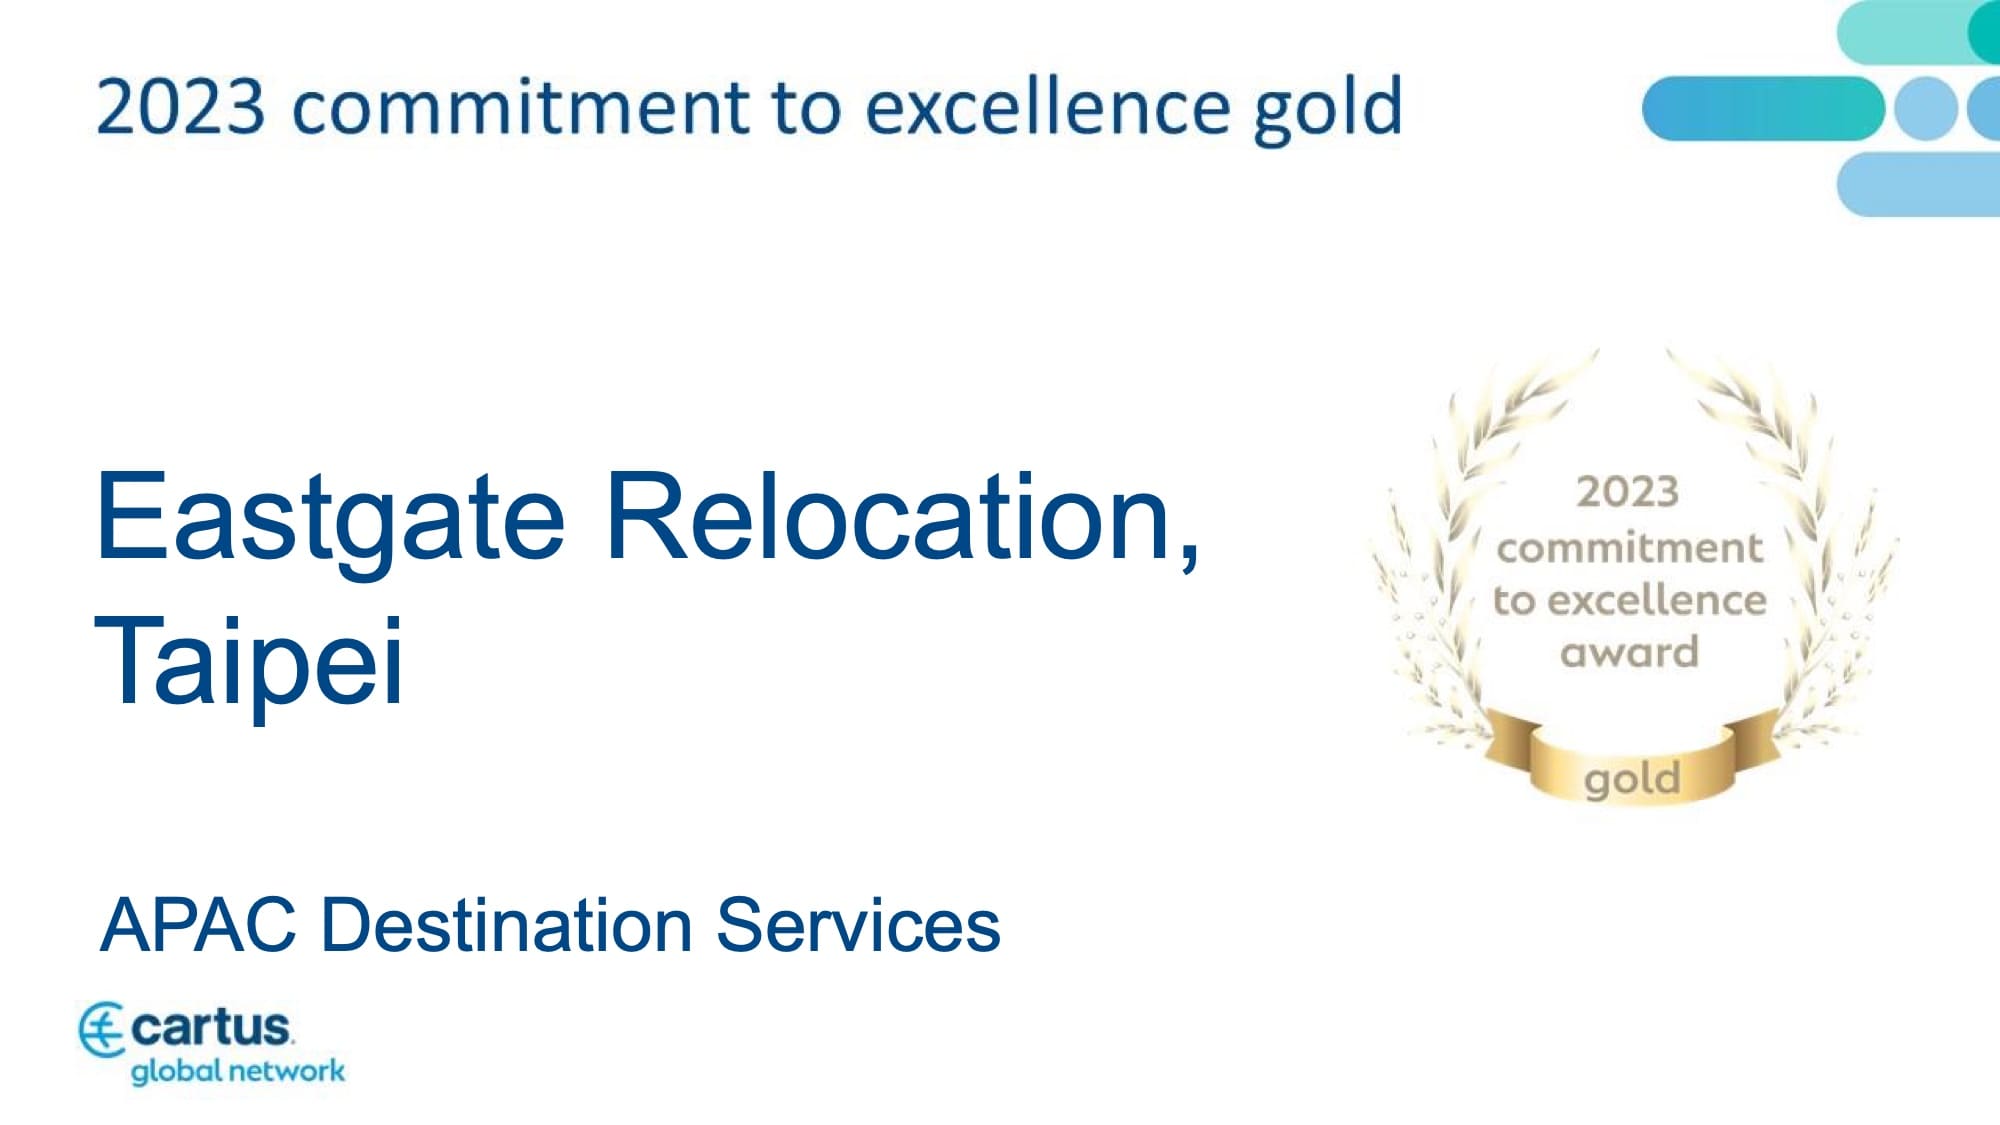 Eastgate Relocation Taiwan Receives Top Level, Commitment to Excellence Gold Award at Cartus 2023 Global Network Conference